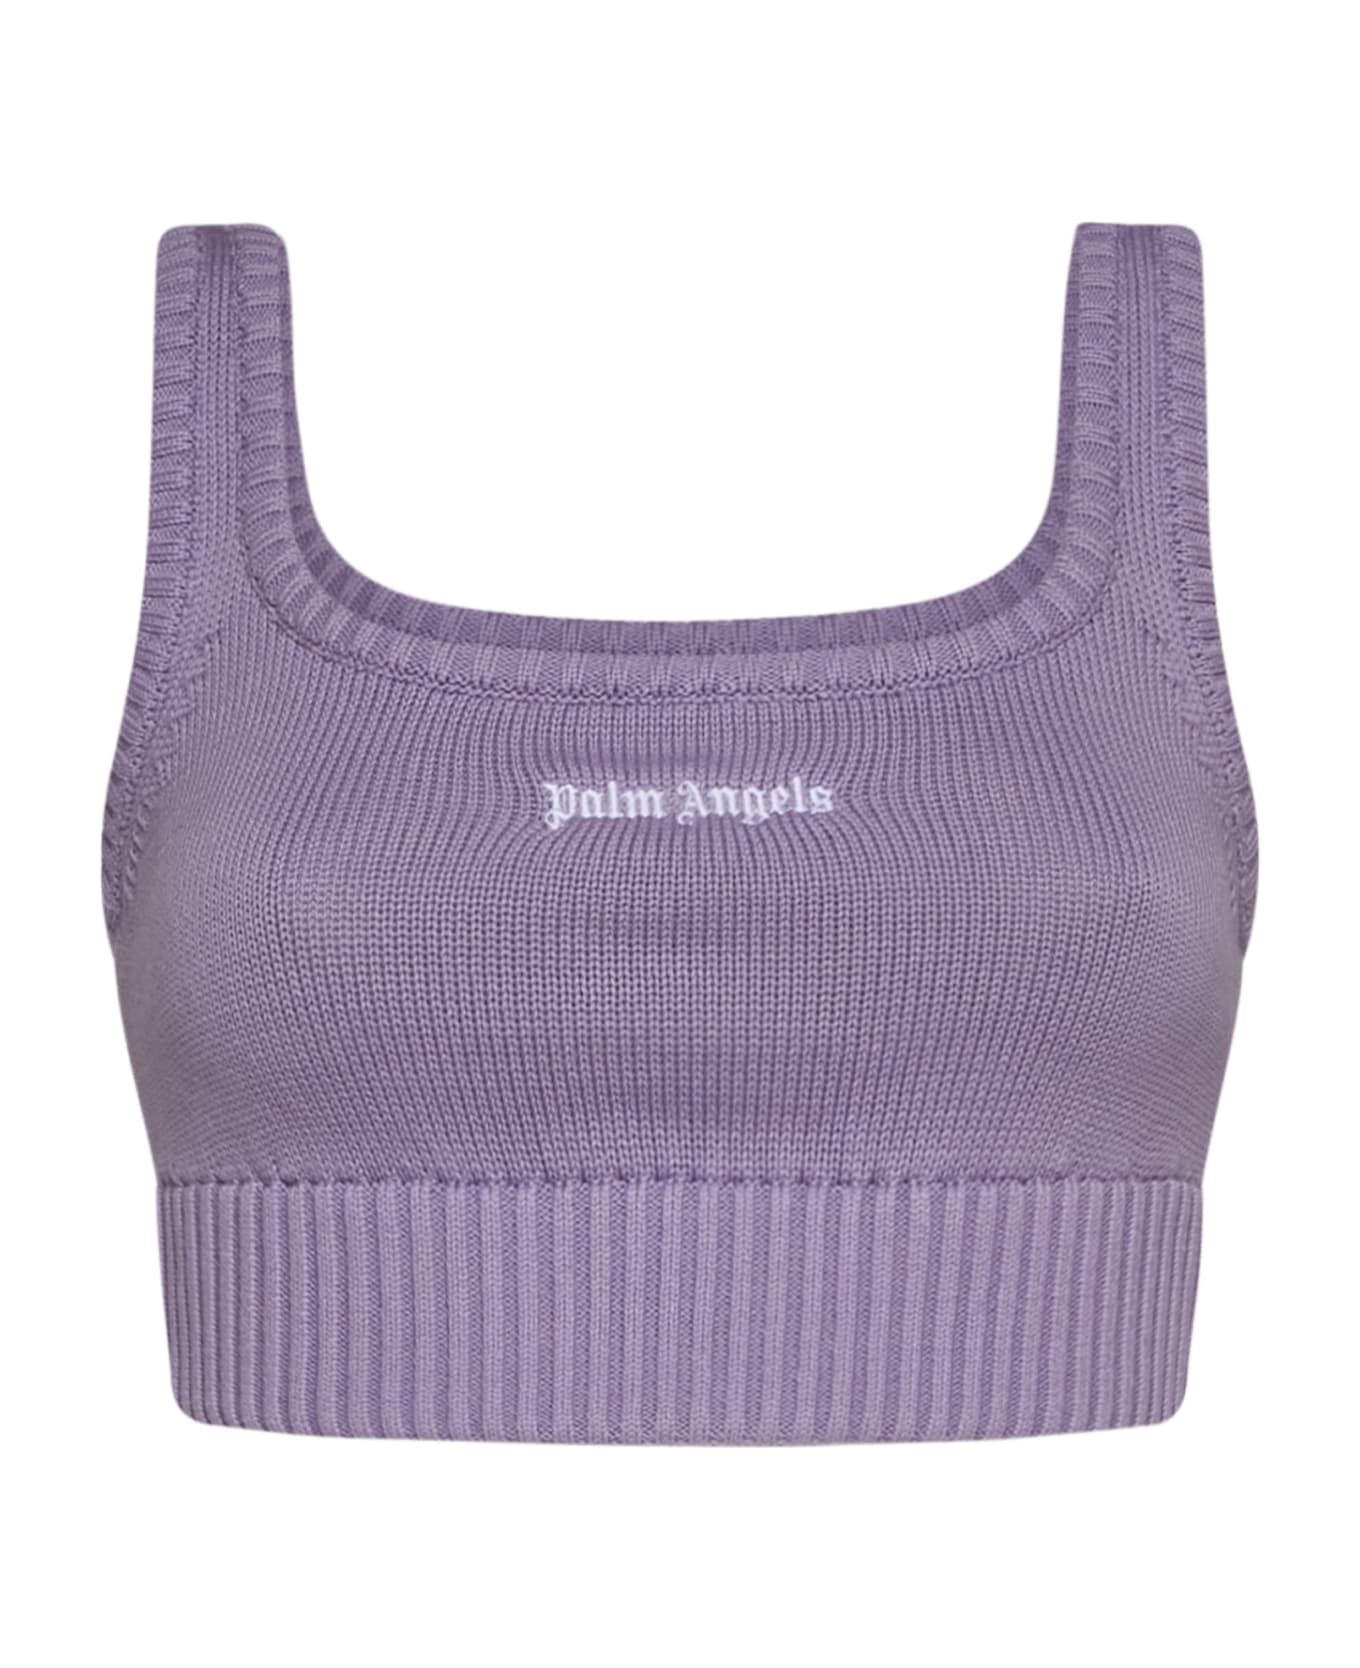 Palm Angels Logo Embroidered Knit Cropped Top - Lilac off white